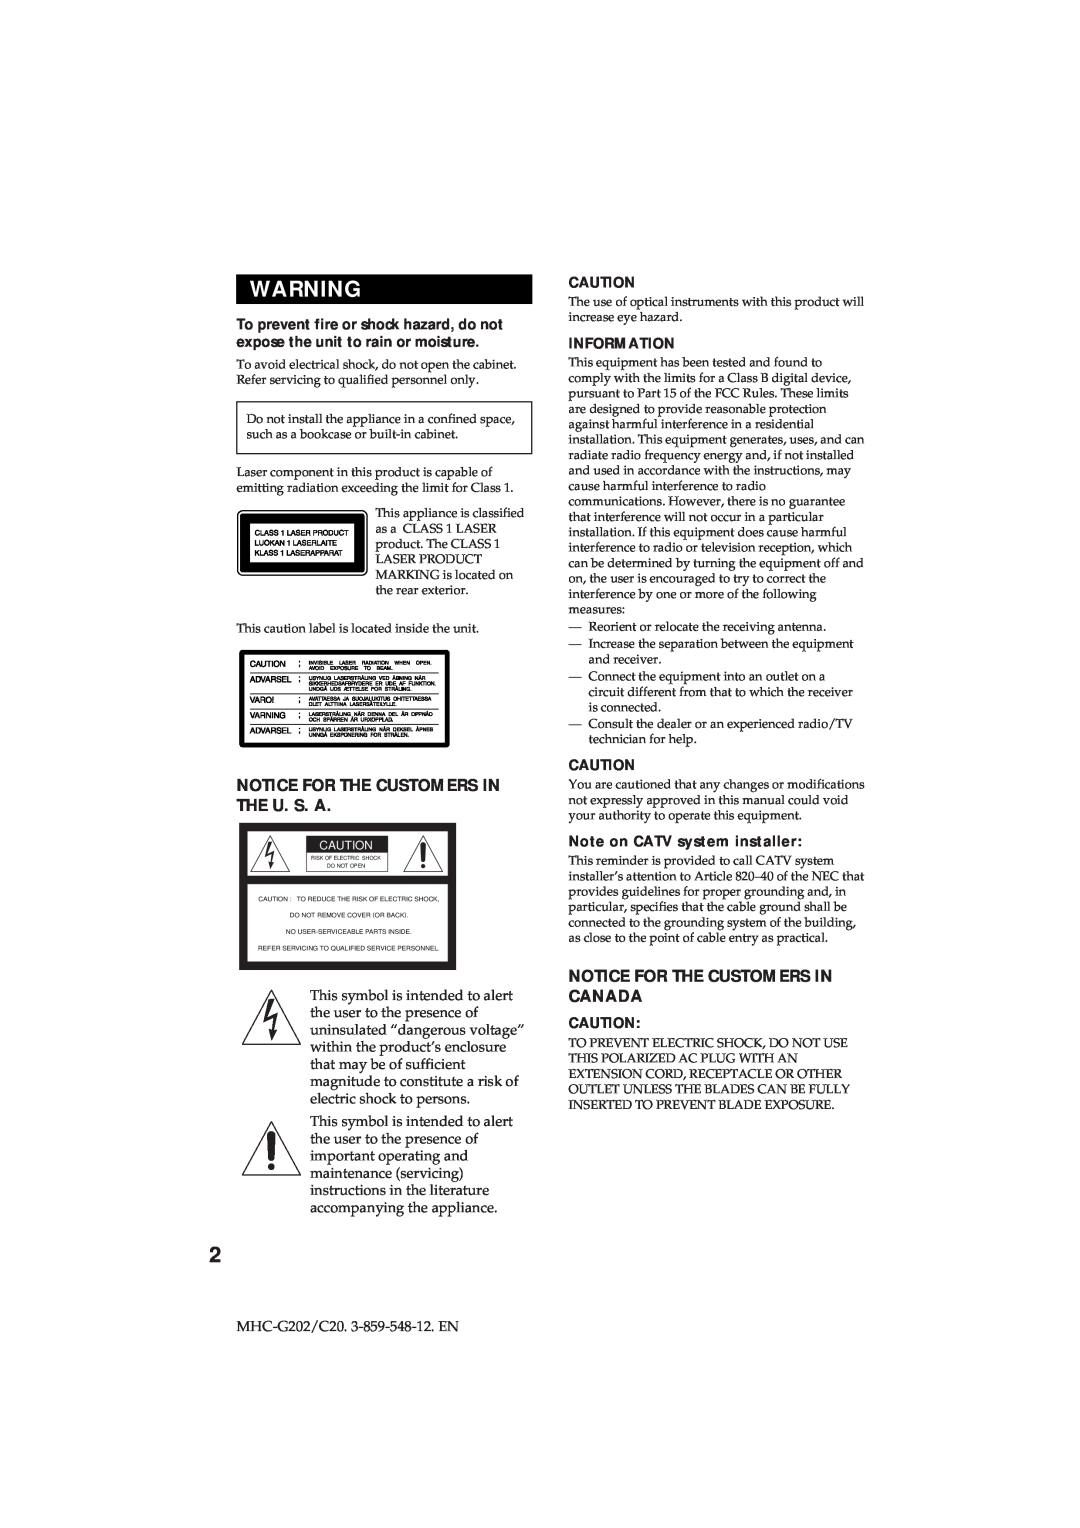 Sony MHC-G202/C20 manual Notice For The Customers In The U. S. A, Notice For The Customers In Canada, Information 